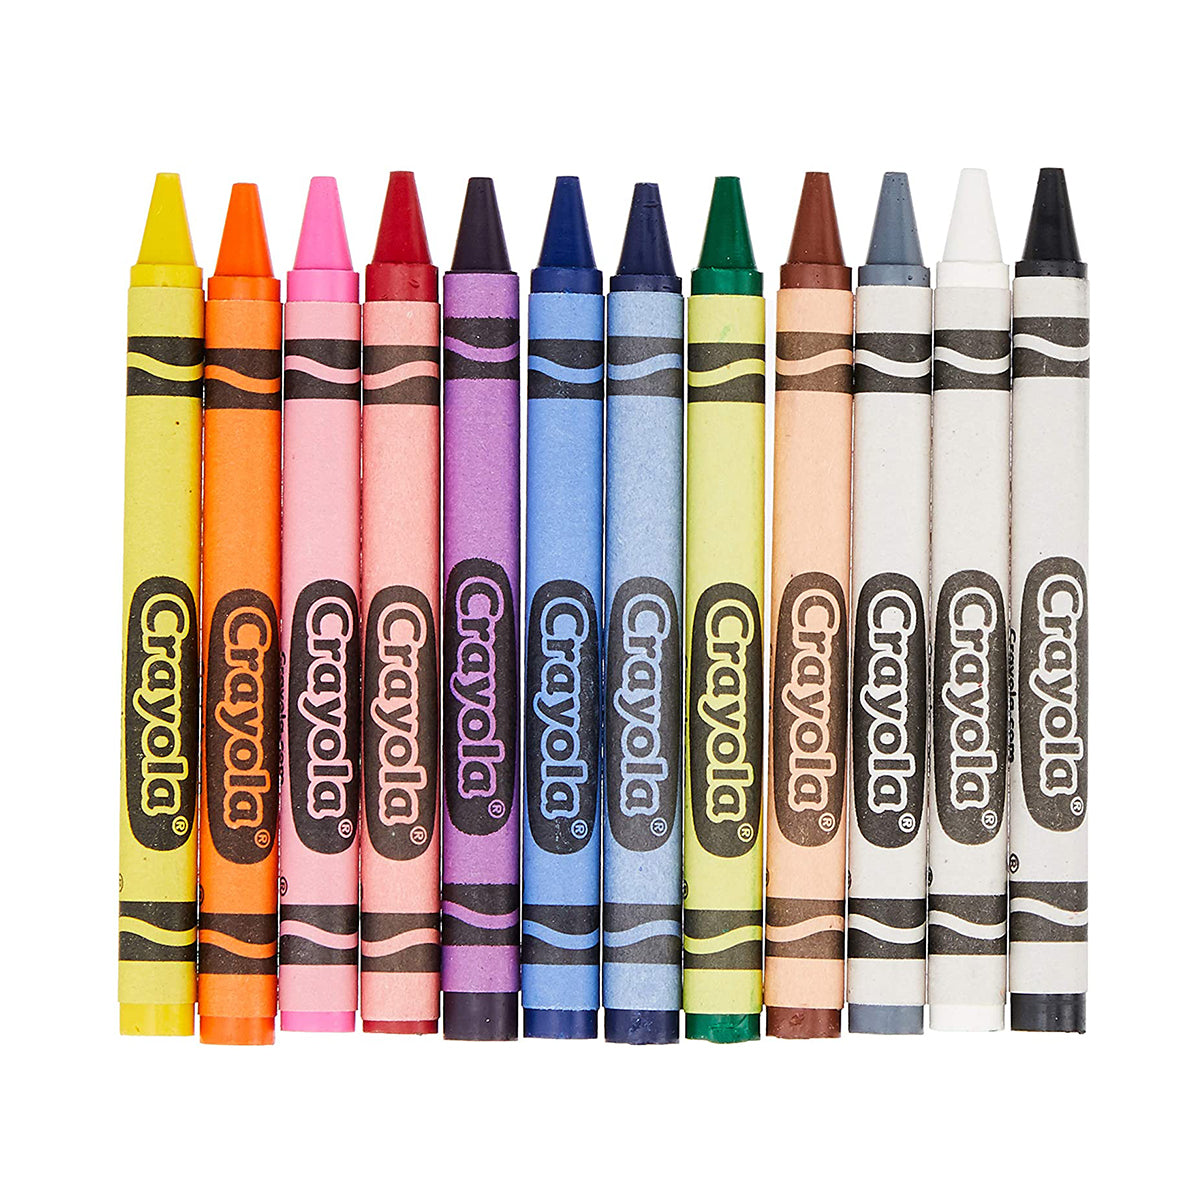 Crayola - 120 ct Colored Pencils – The Entertainer Pakistan